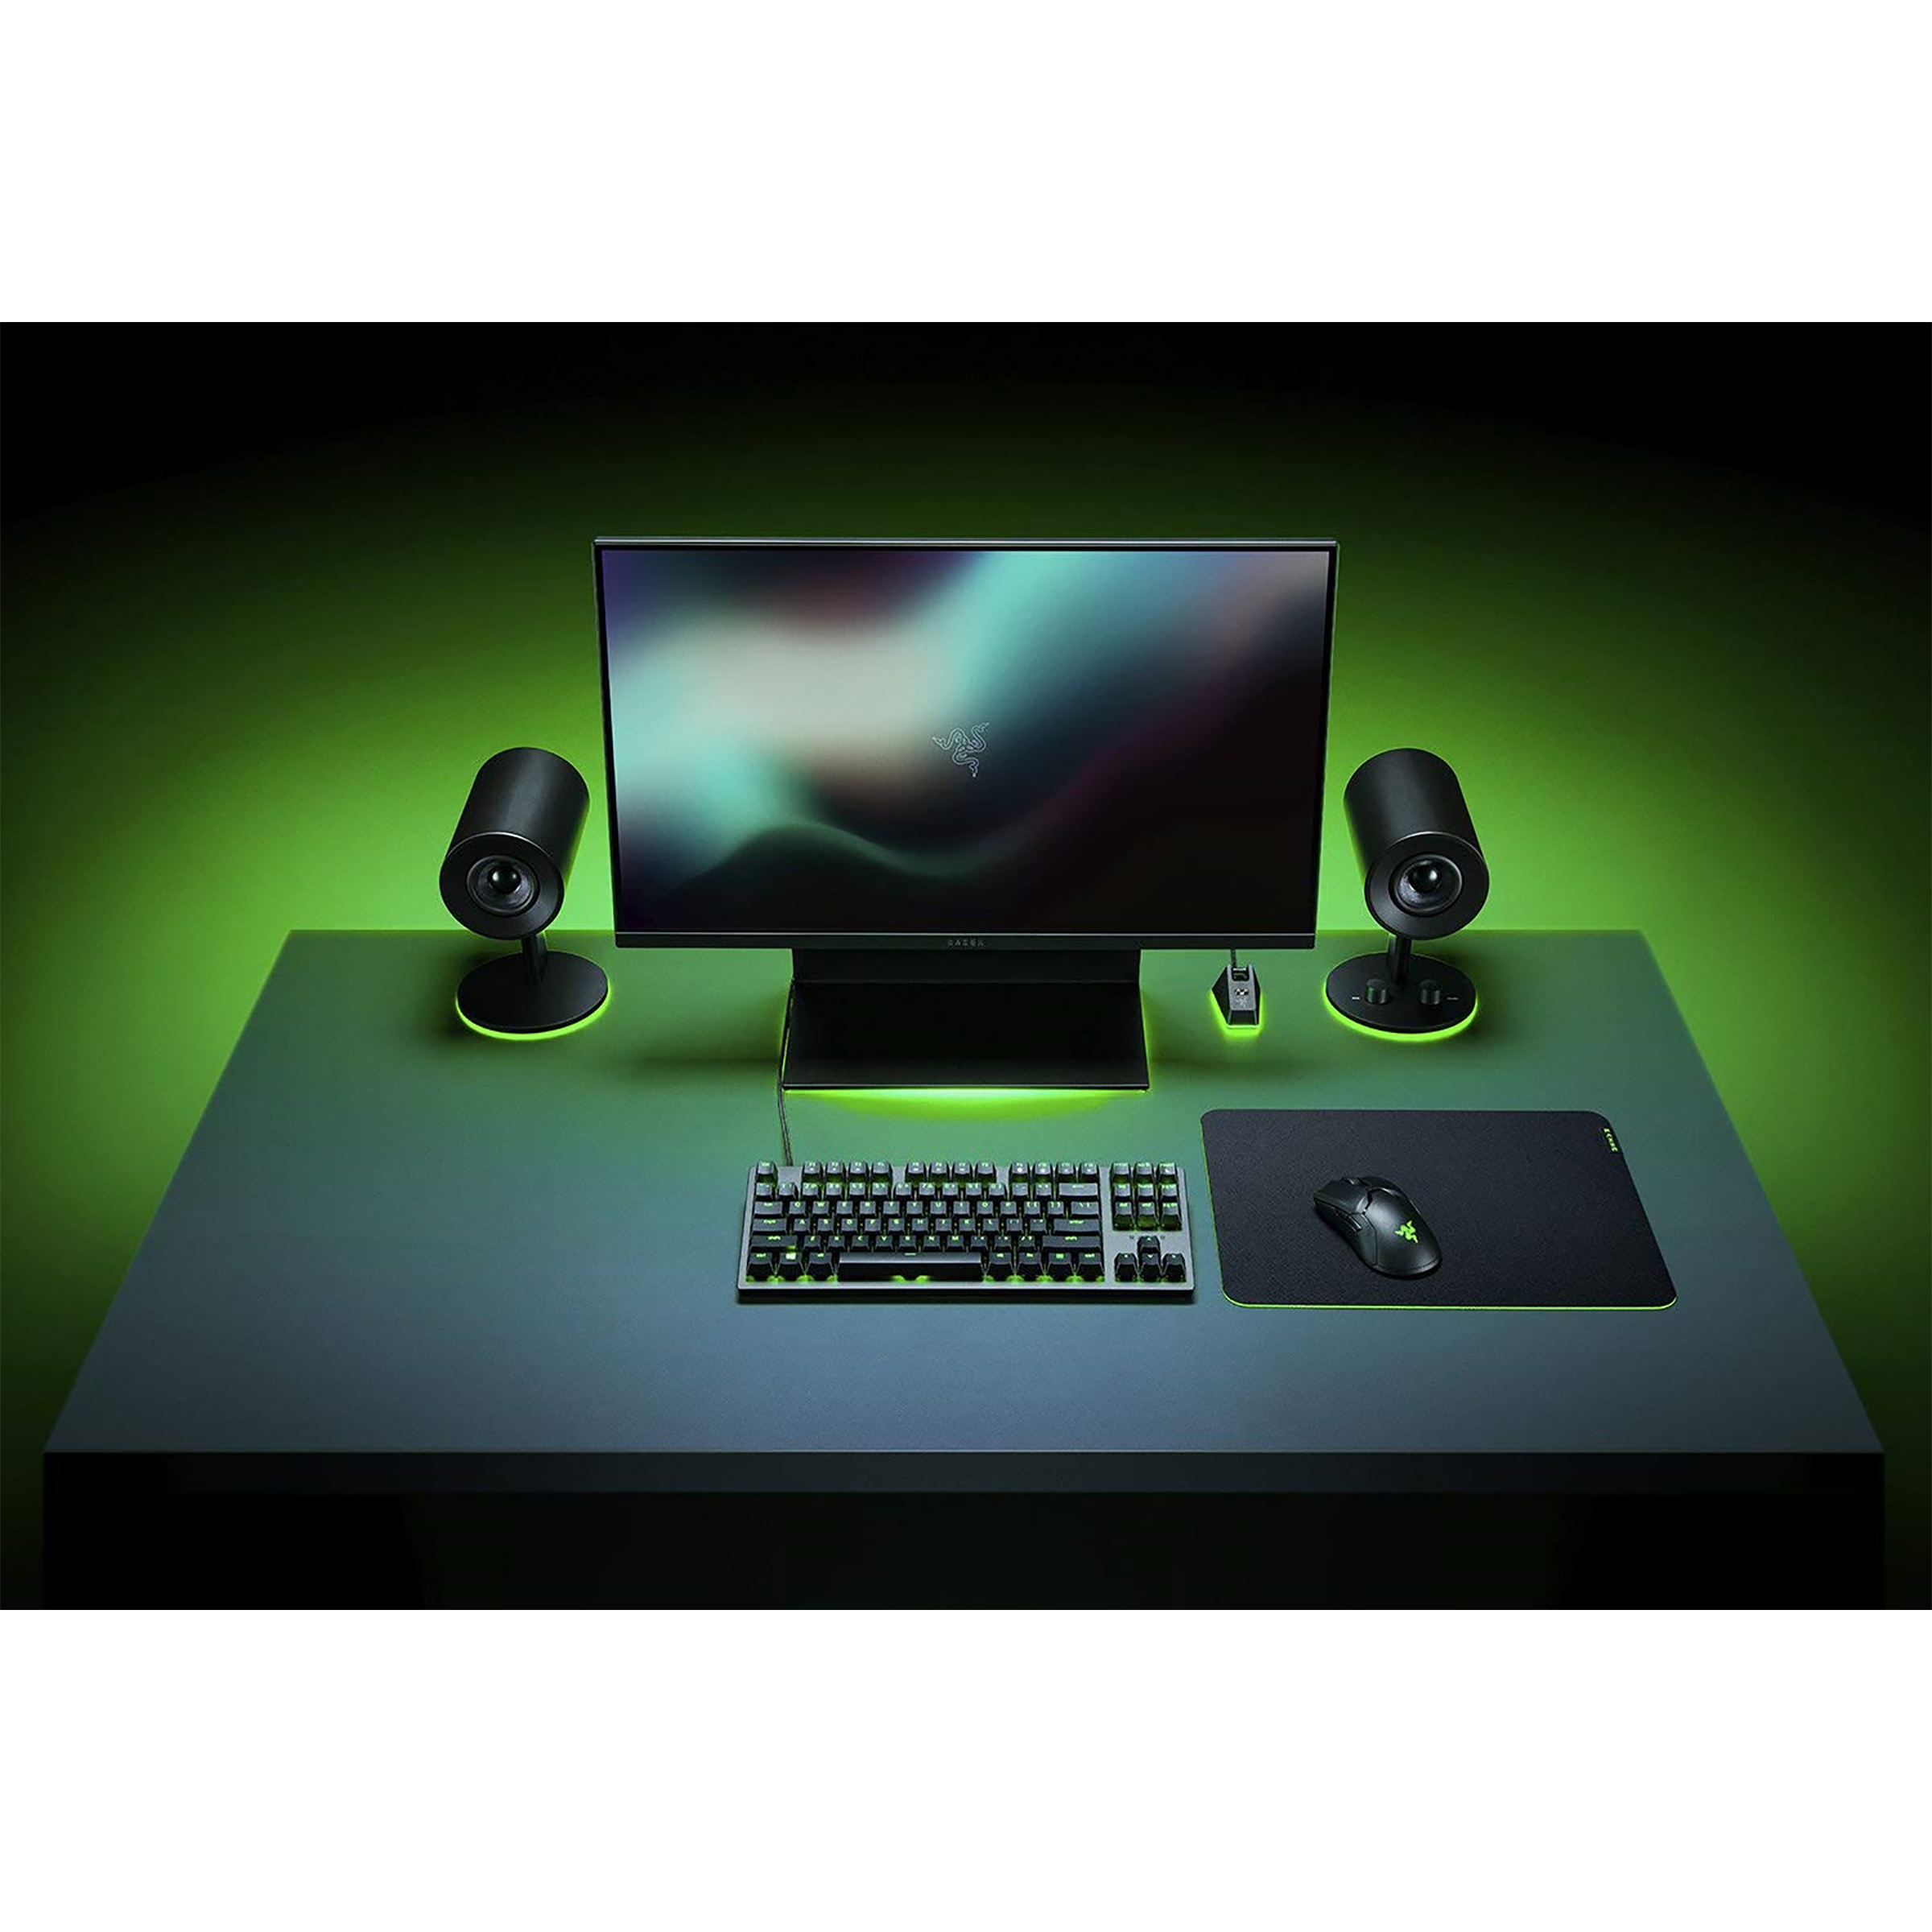 Razer Gigantus Mouse Pad For Mouse (Thick, High-Density Rubber Foam, RZ02-03330400-R3M1, Black)_4